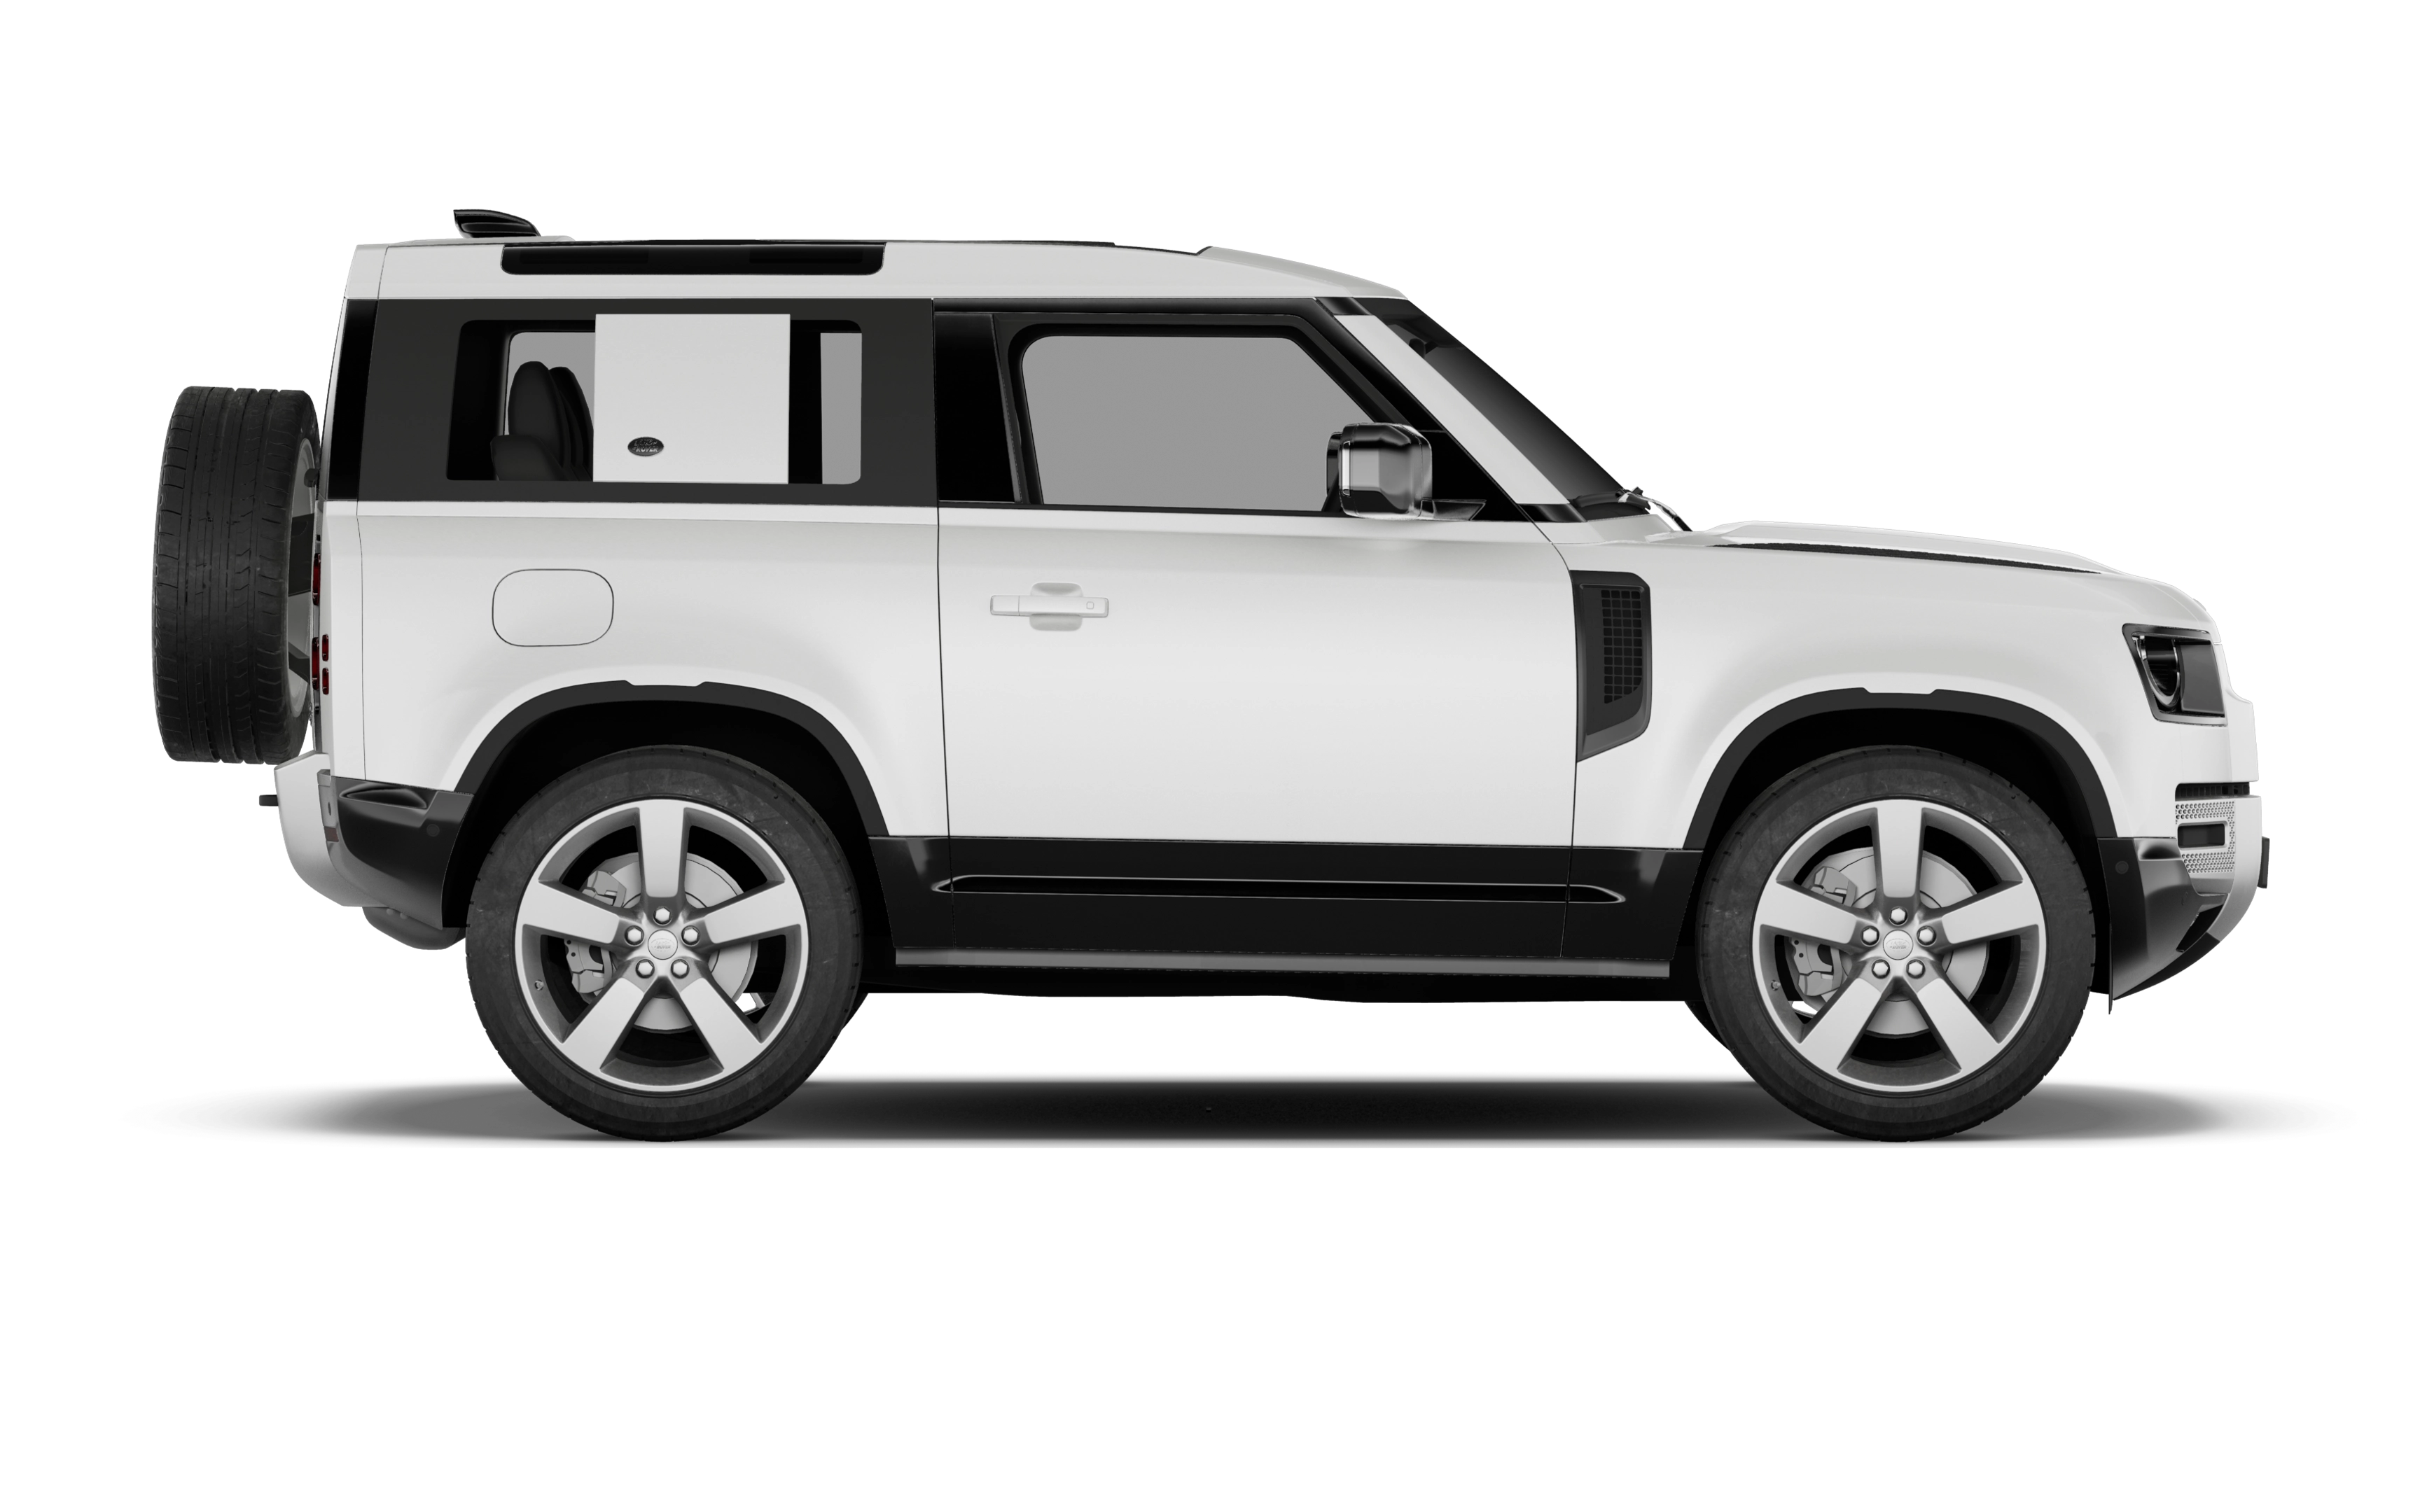 Land rover defender 90 3.0 d250 hard top auto [3 seat]